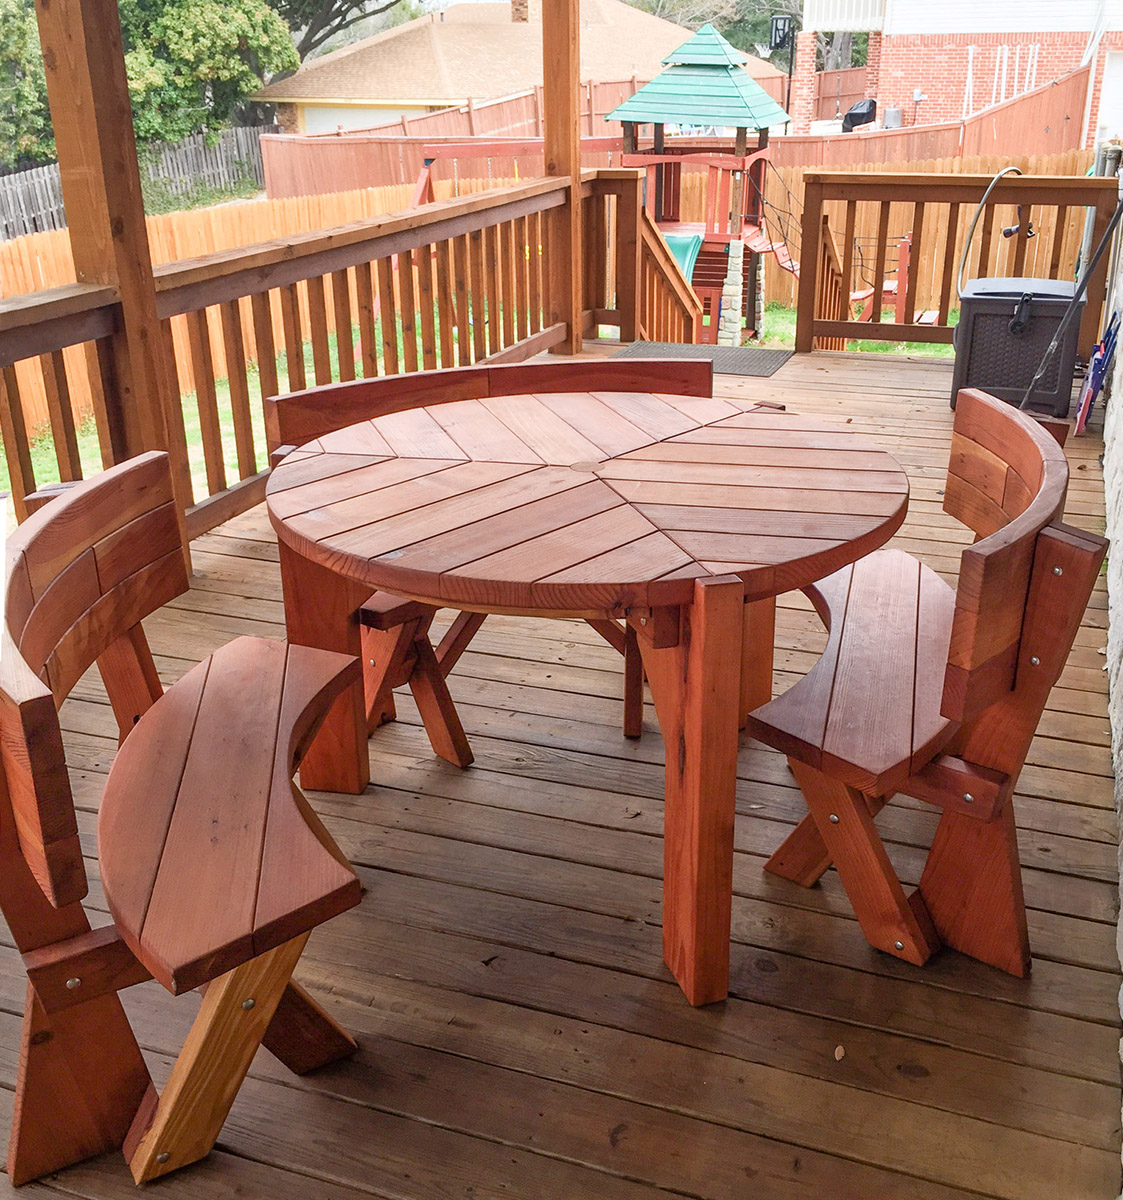 Retro Outdoor Patio Table: 1950s Table & Chairs